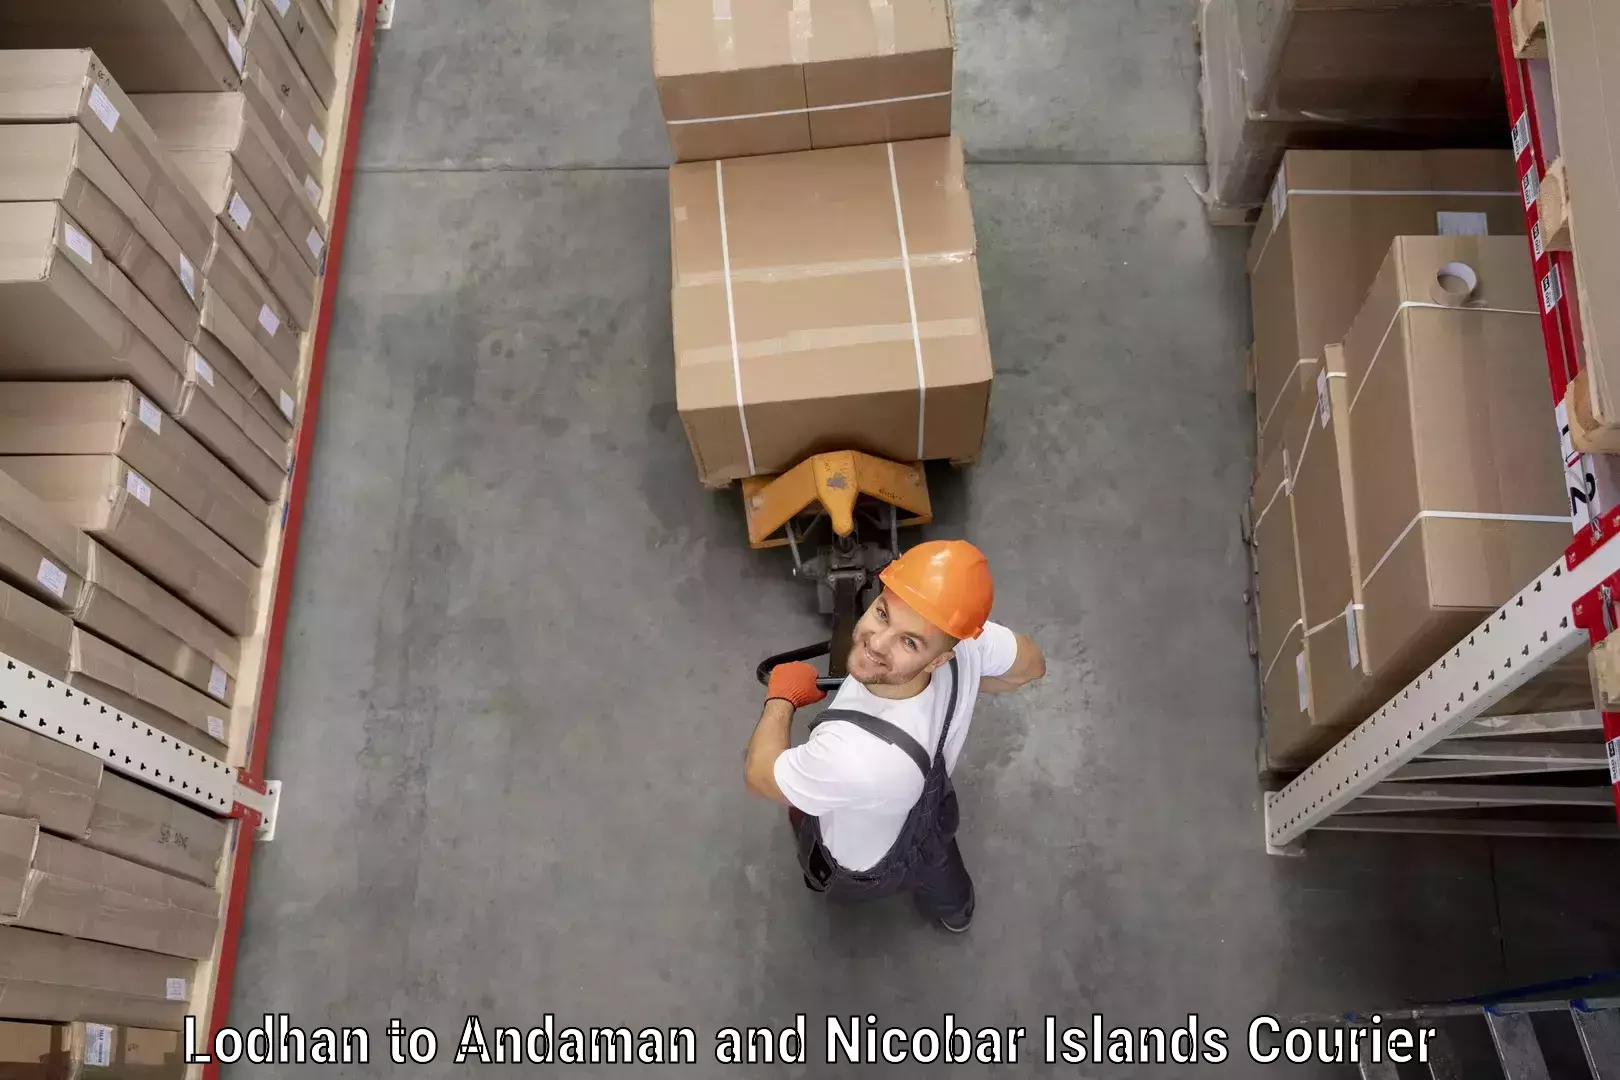 Urban courier service Lodhan to Andaman and Nicobar Islands